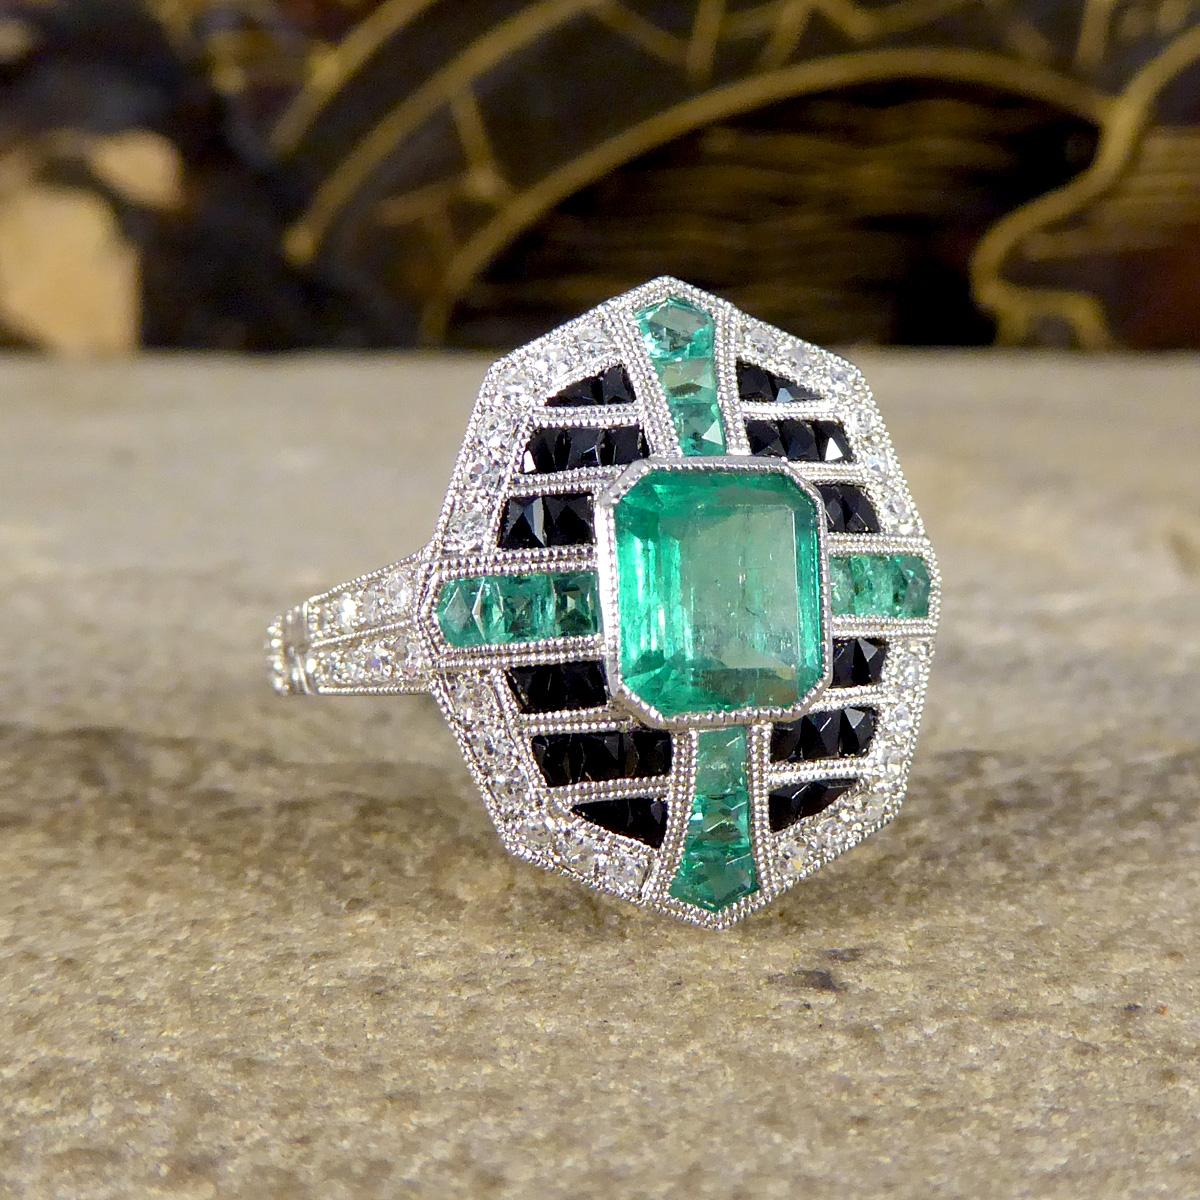 A beautifully detailed Art Deco Style ring, made in Platinum with quality craftsmanship coupled with alluring and bright stones. Set in the Centre of this ring is a 0.85ct Emerald Cut Emerald in a collar setting leading to an additional almost cross